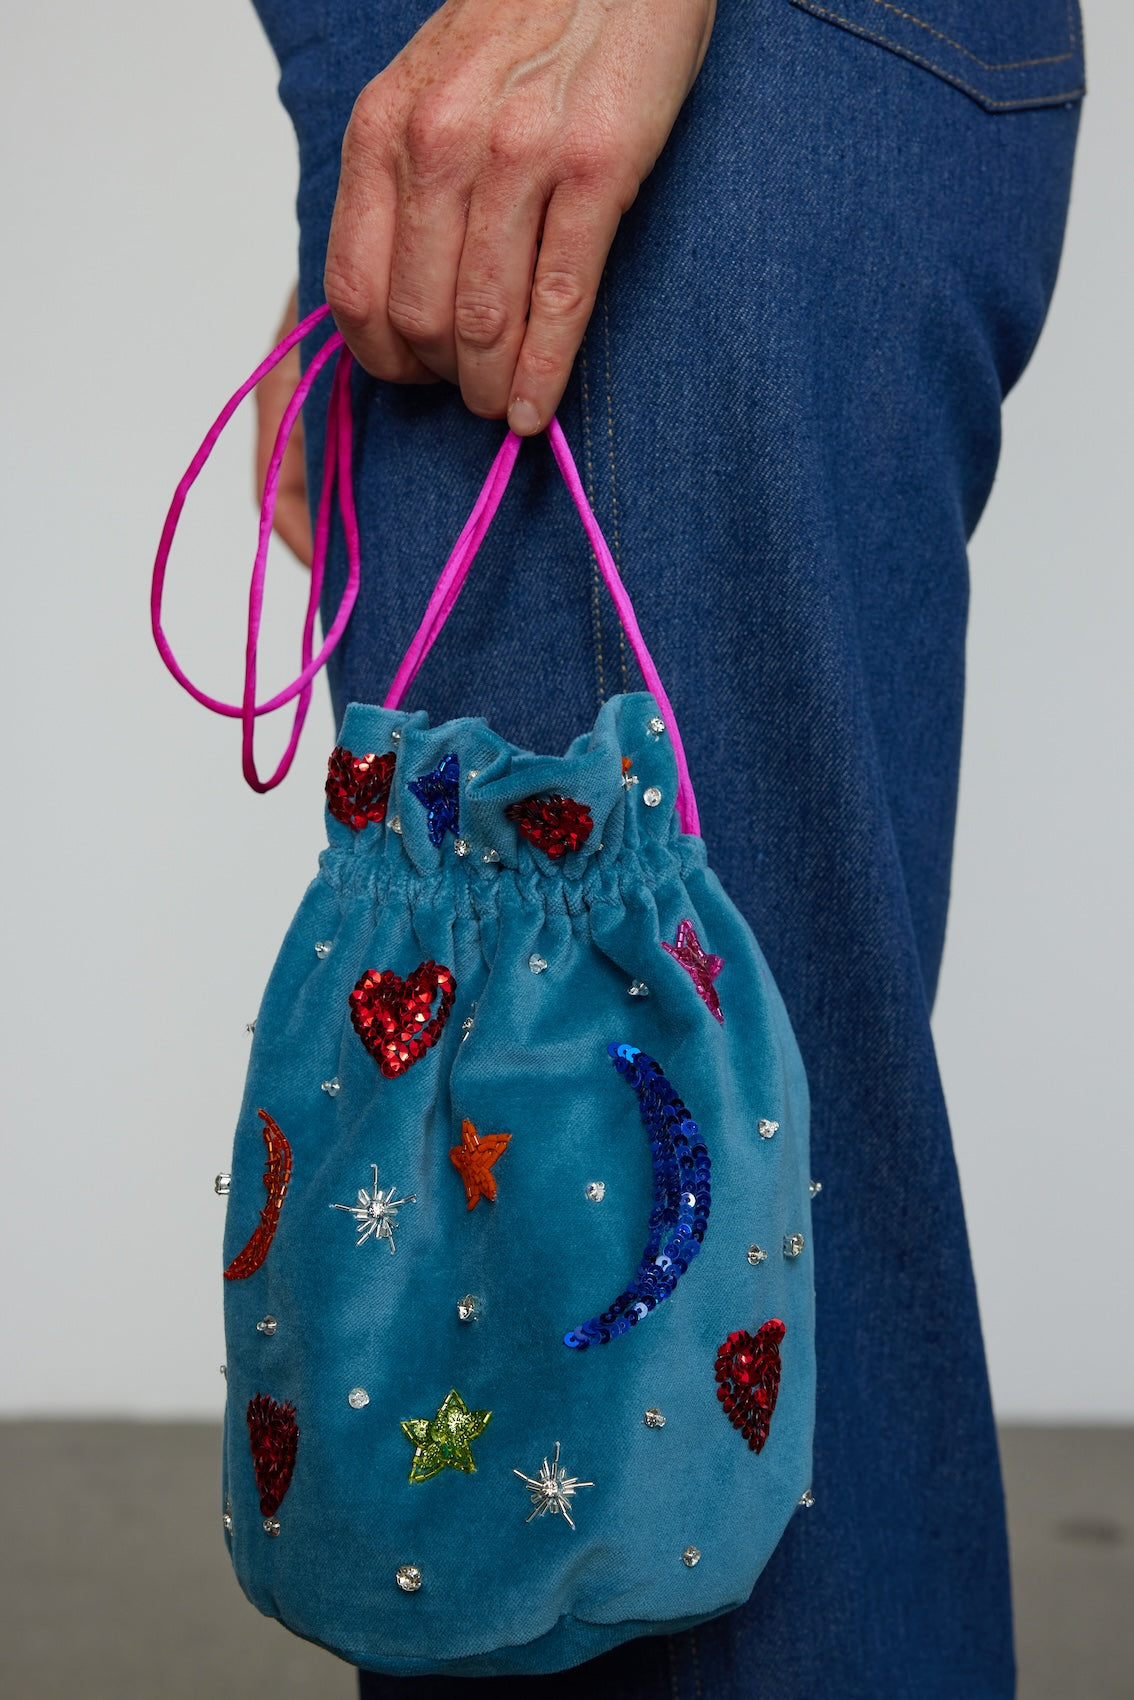 Caro Editions Mini Bucket Bag in silk velvet is exquisitely hand-embroidered by skilled artisans using beads and sequins.  Material: 100% Cotton. Lining: 100% Silk. Beading: Polyester & Glass.